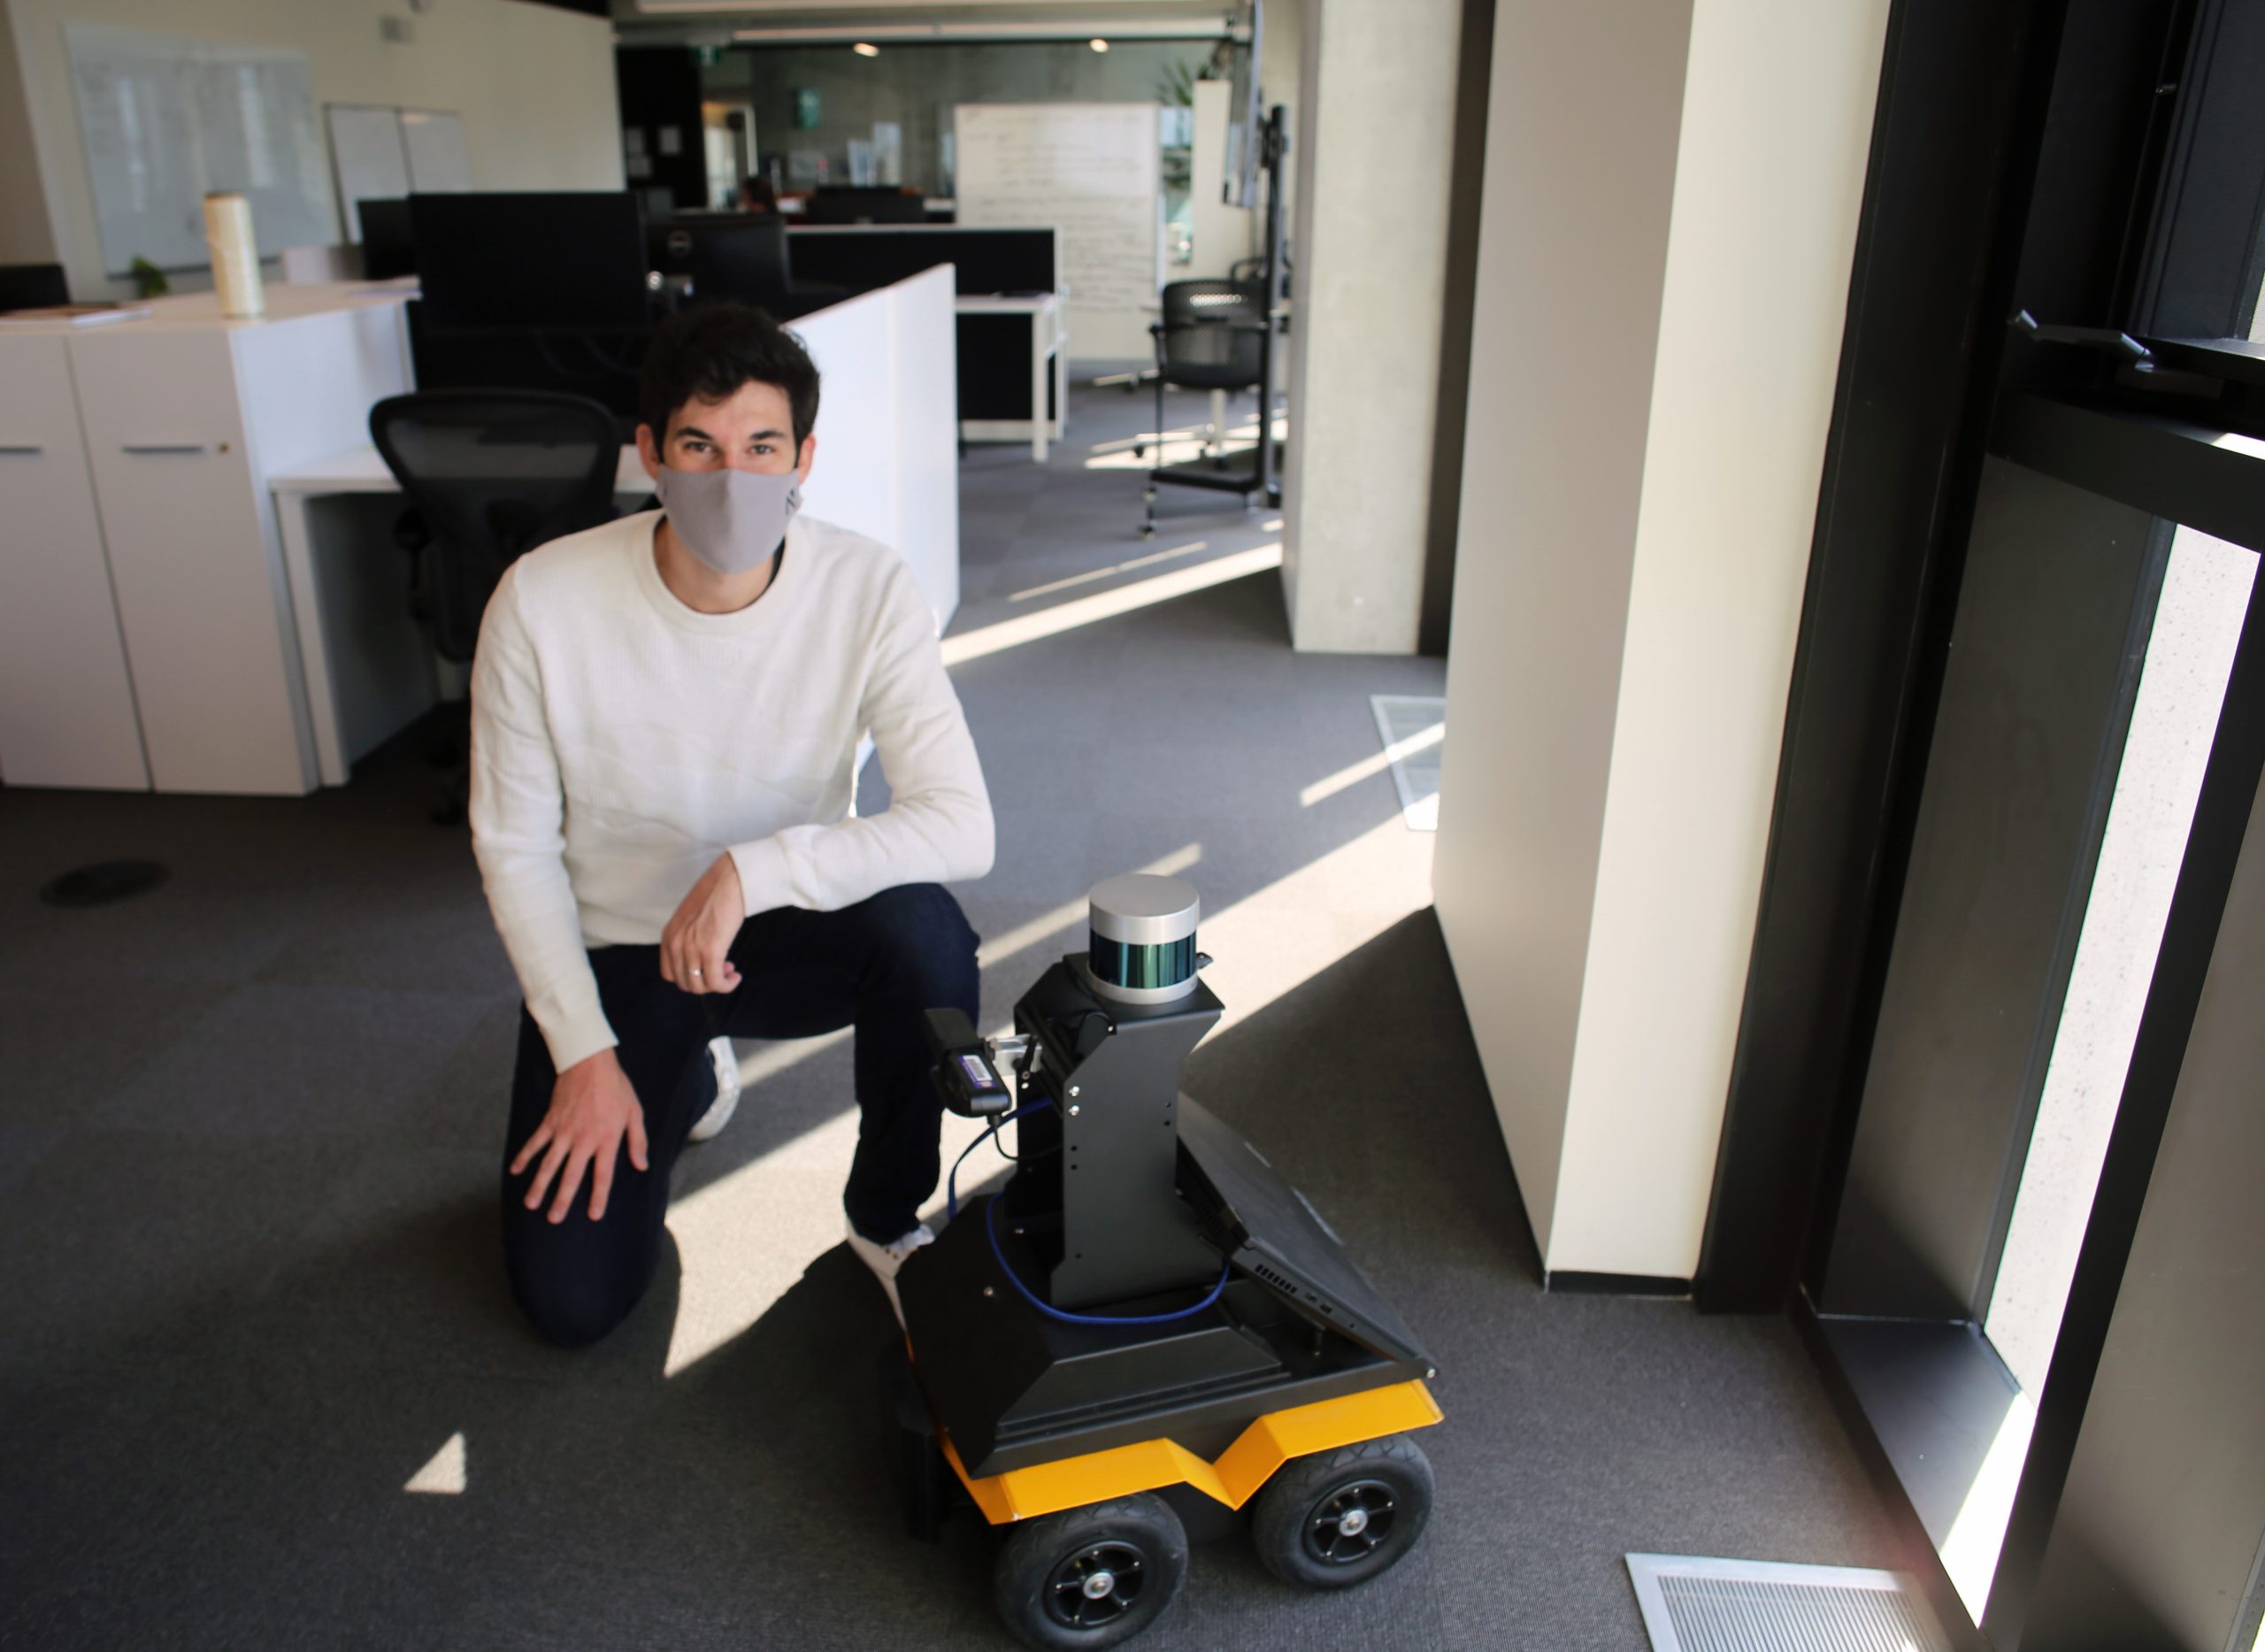 Image link to UTIAS researchers design socially aware robots to move safely around people